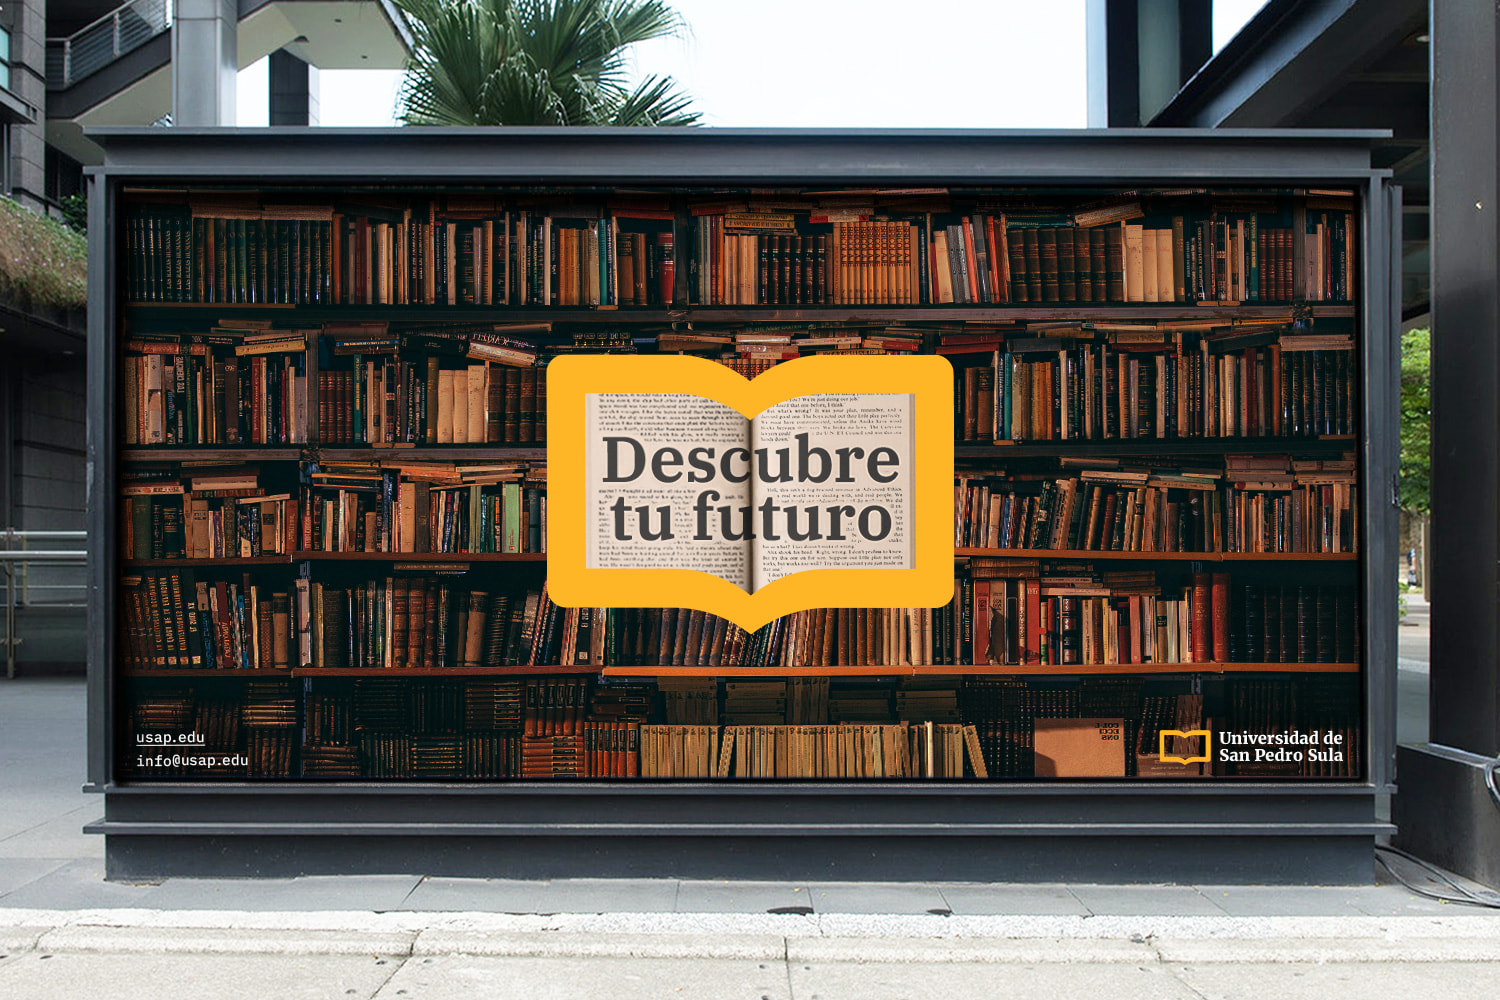 Street billboard for University of San Pedro Sula showing a bookshelf and the USAP logo as a window to an open book